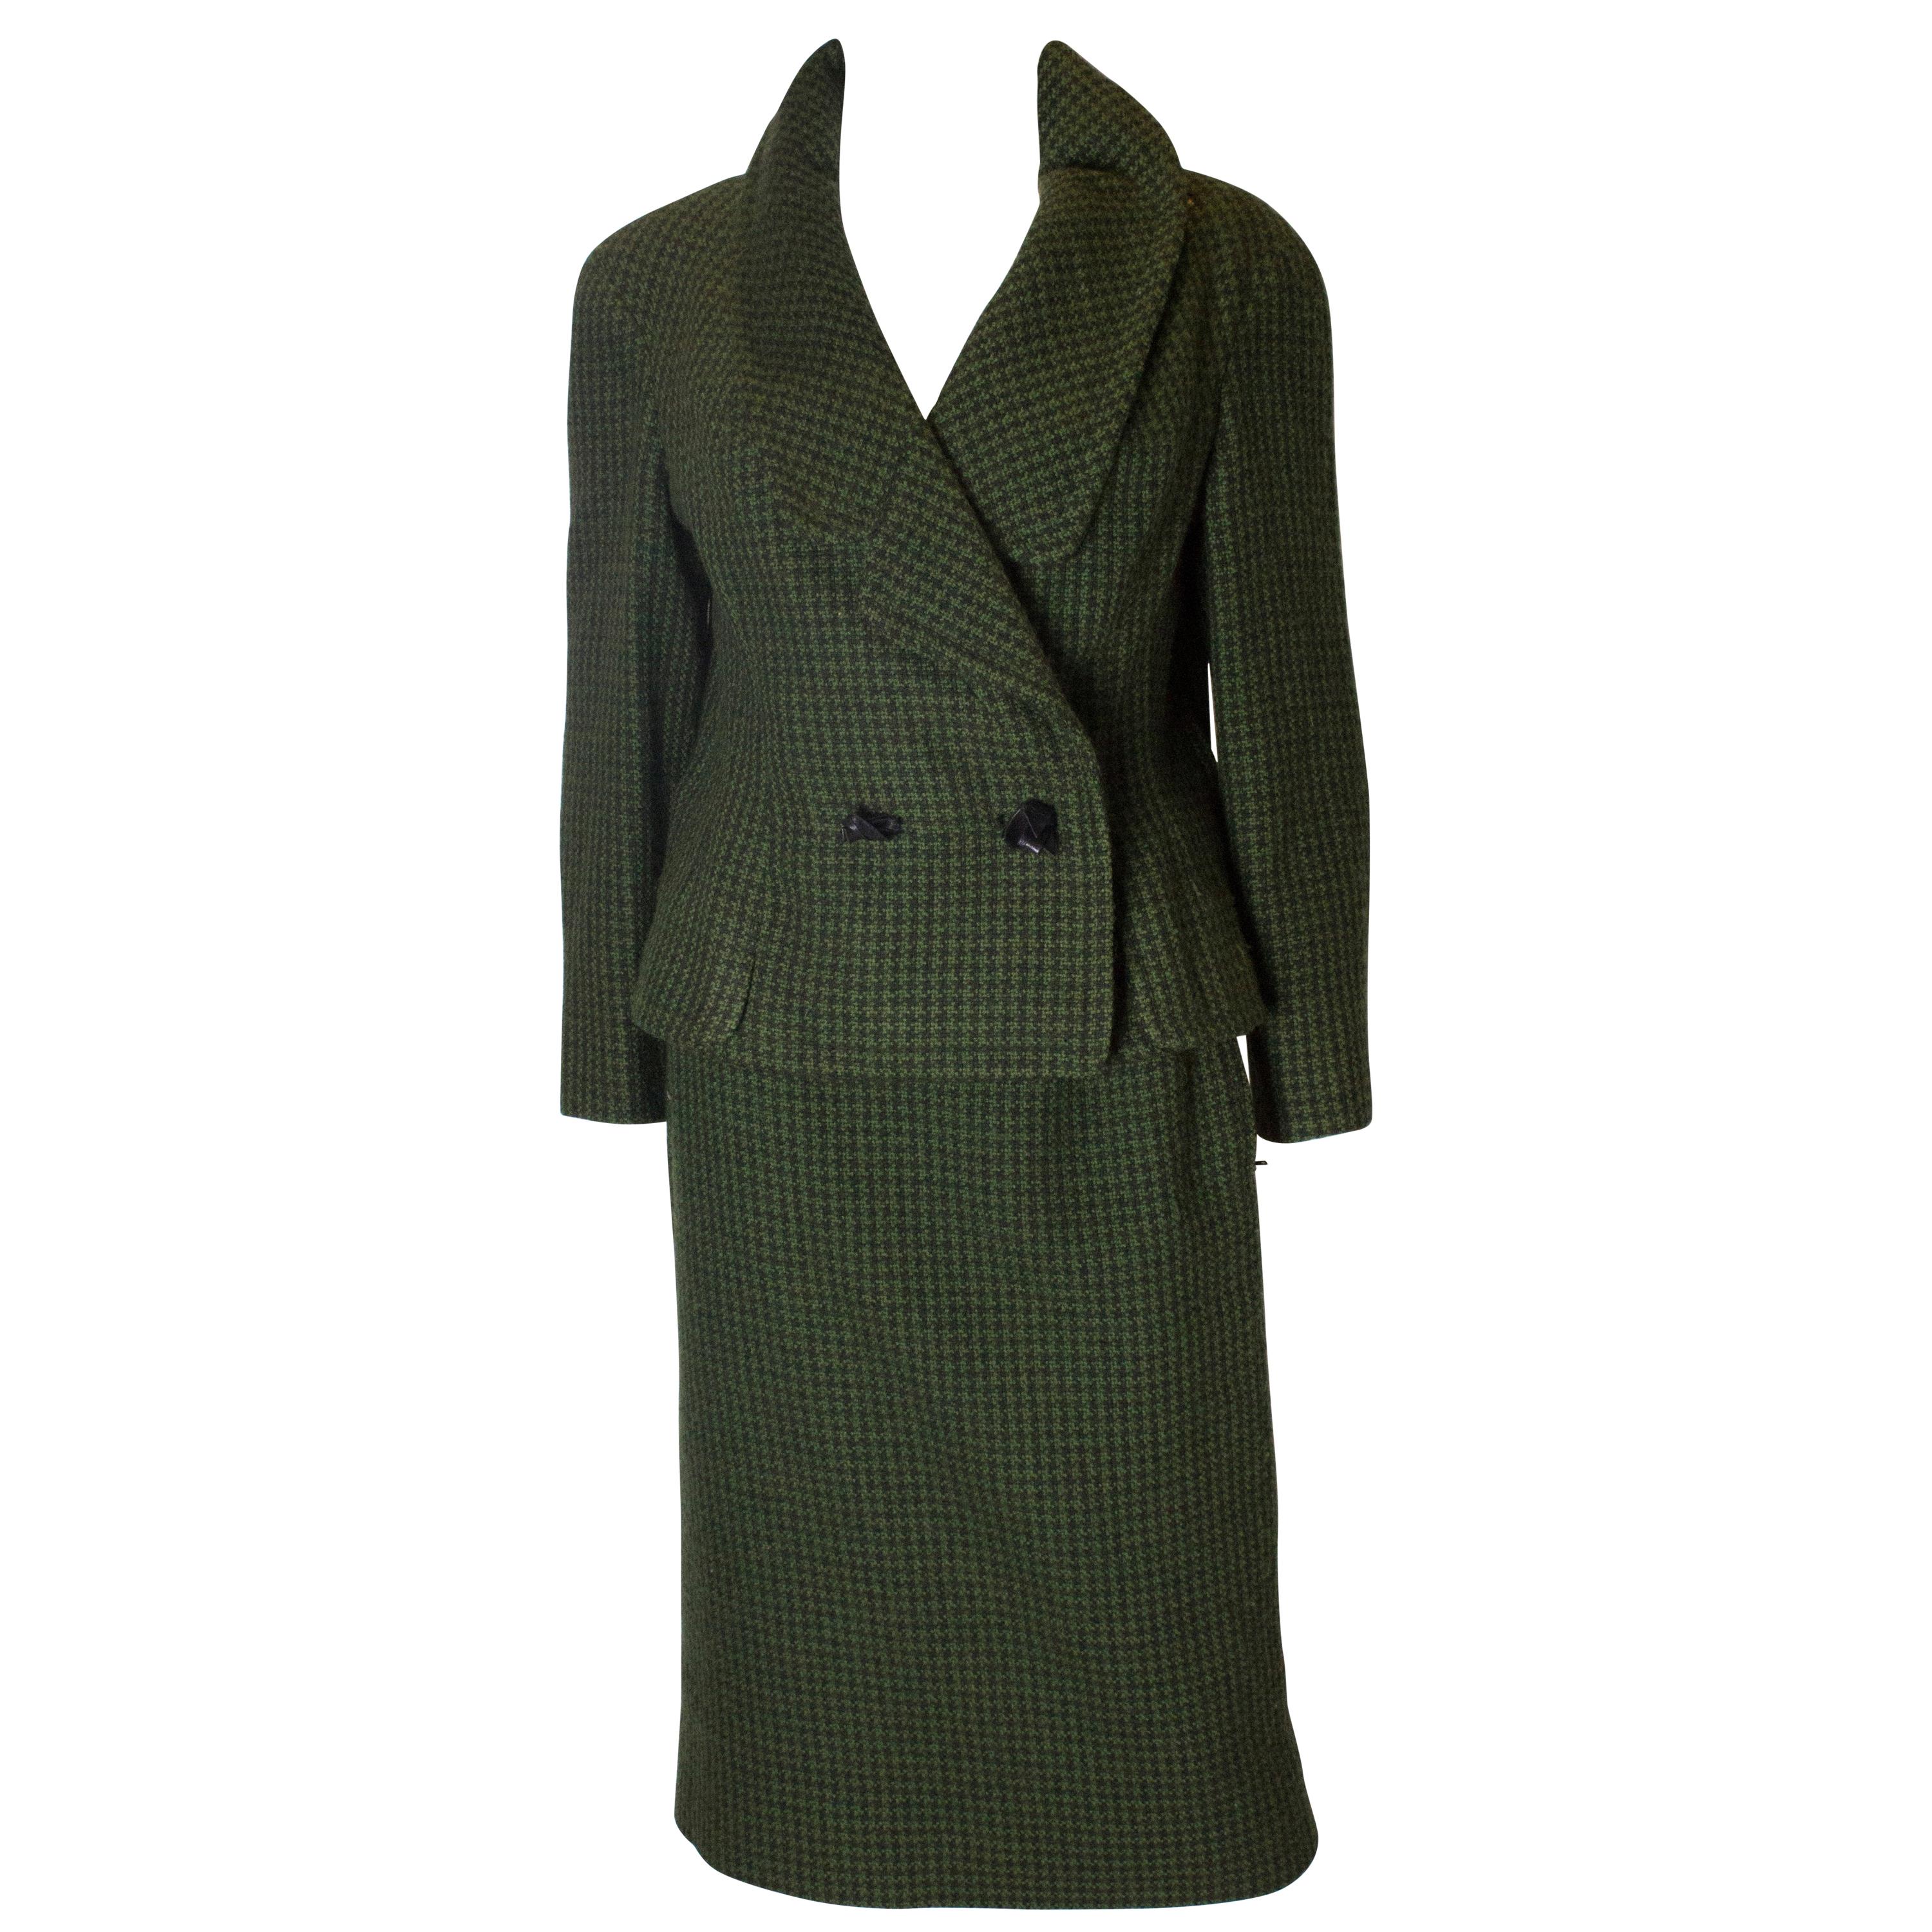 Vintage Hardy Amies Green and Black Wool Suit